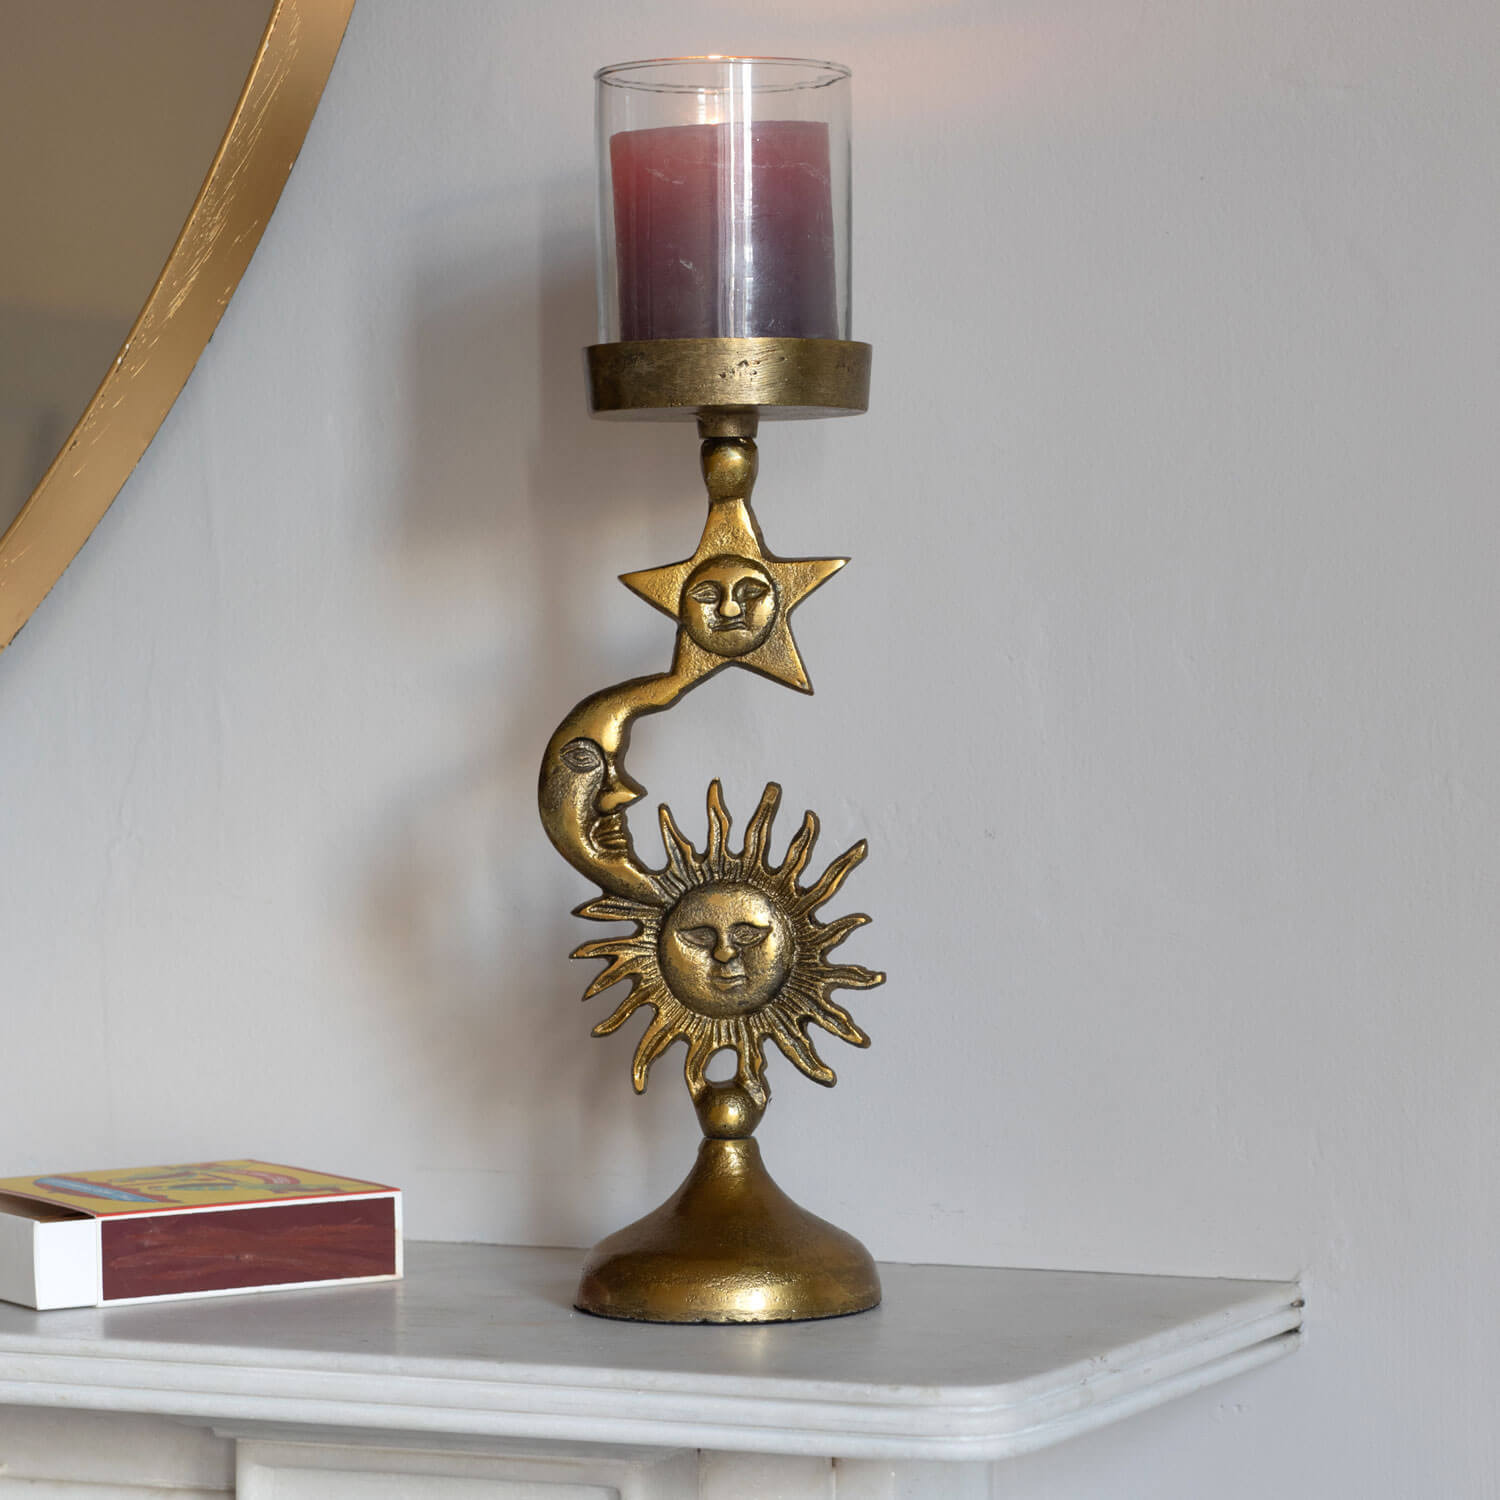 Graham and Green Celestial Candle Holder - image 1